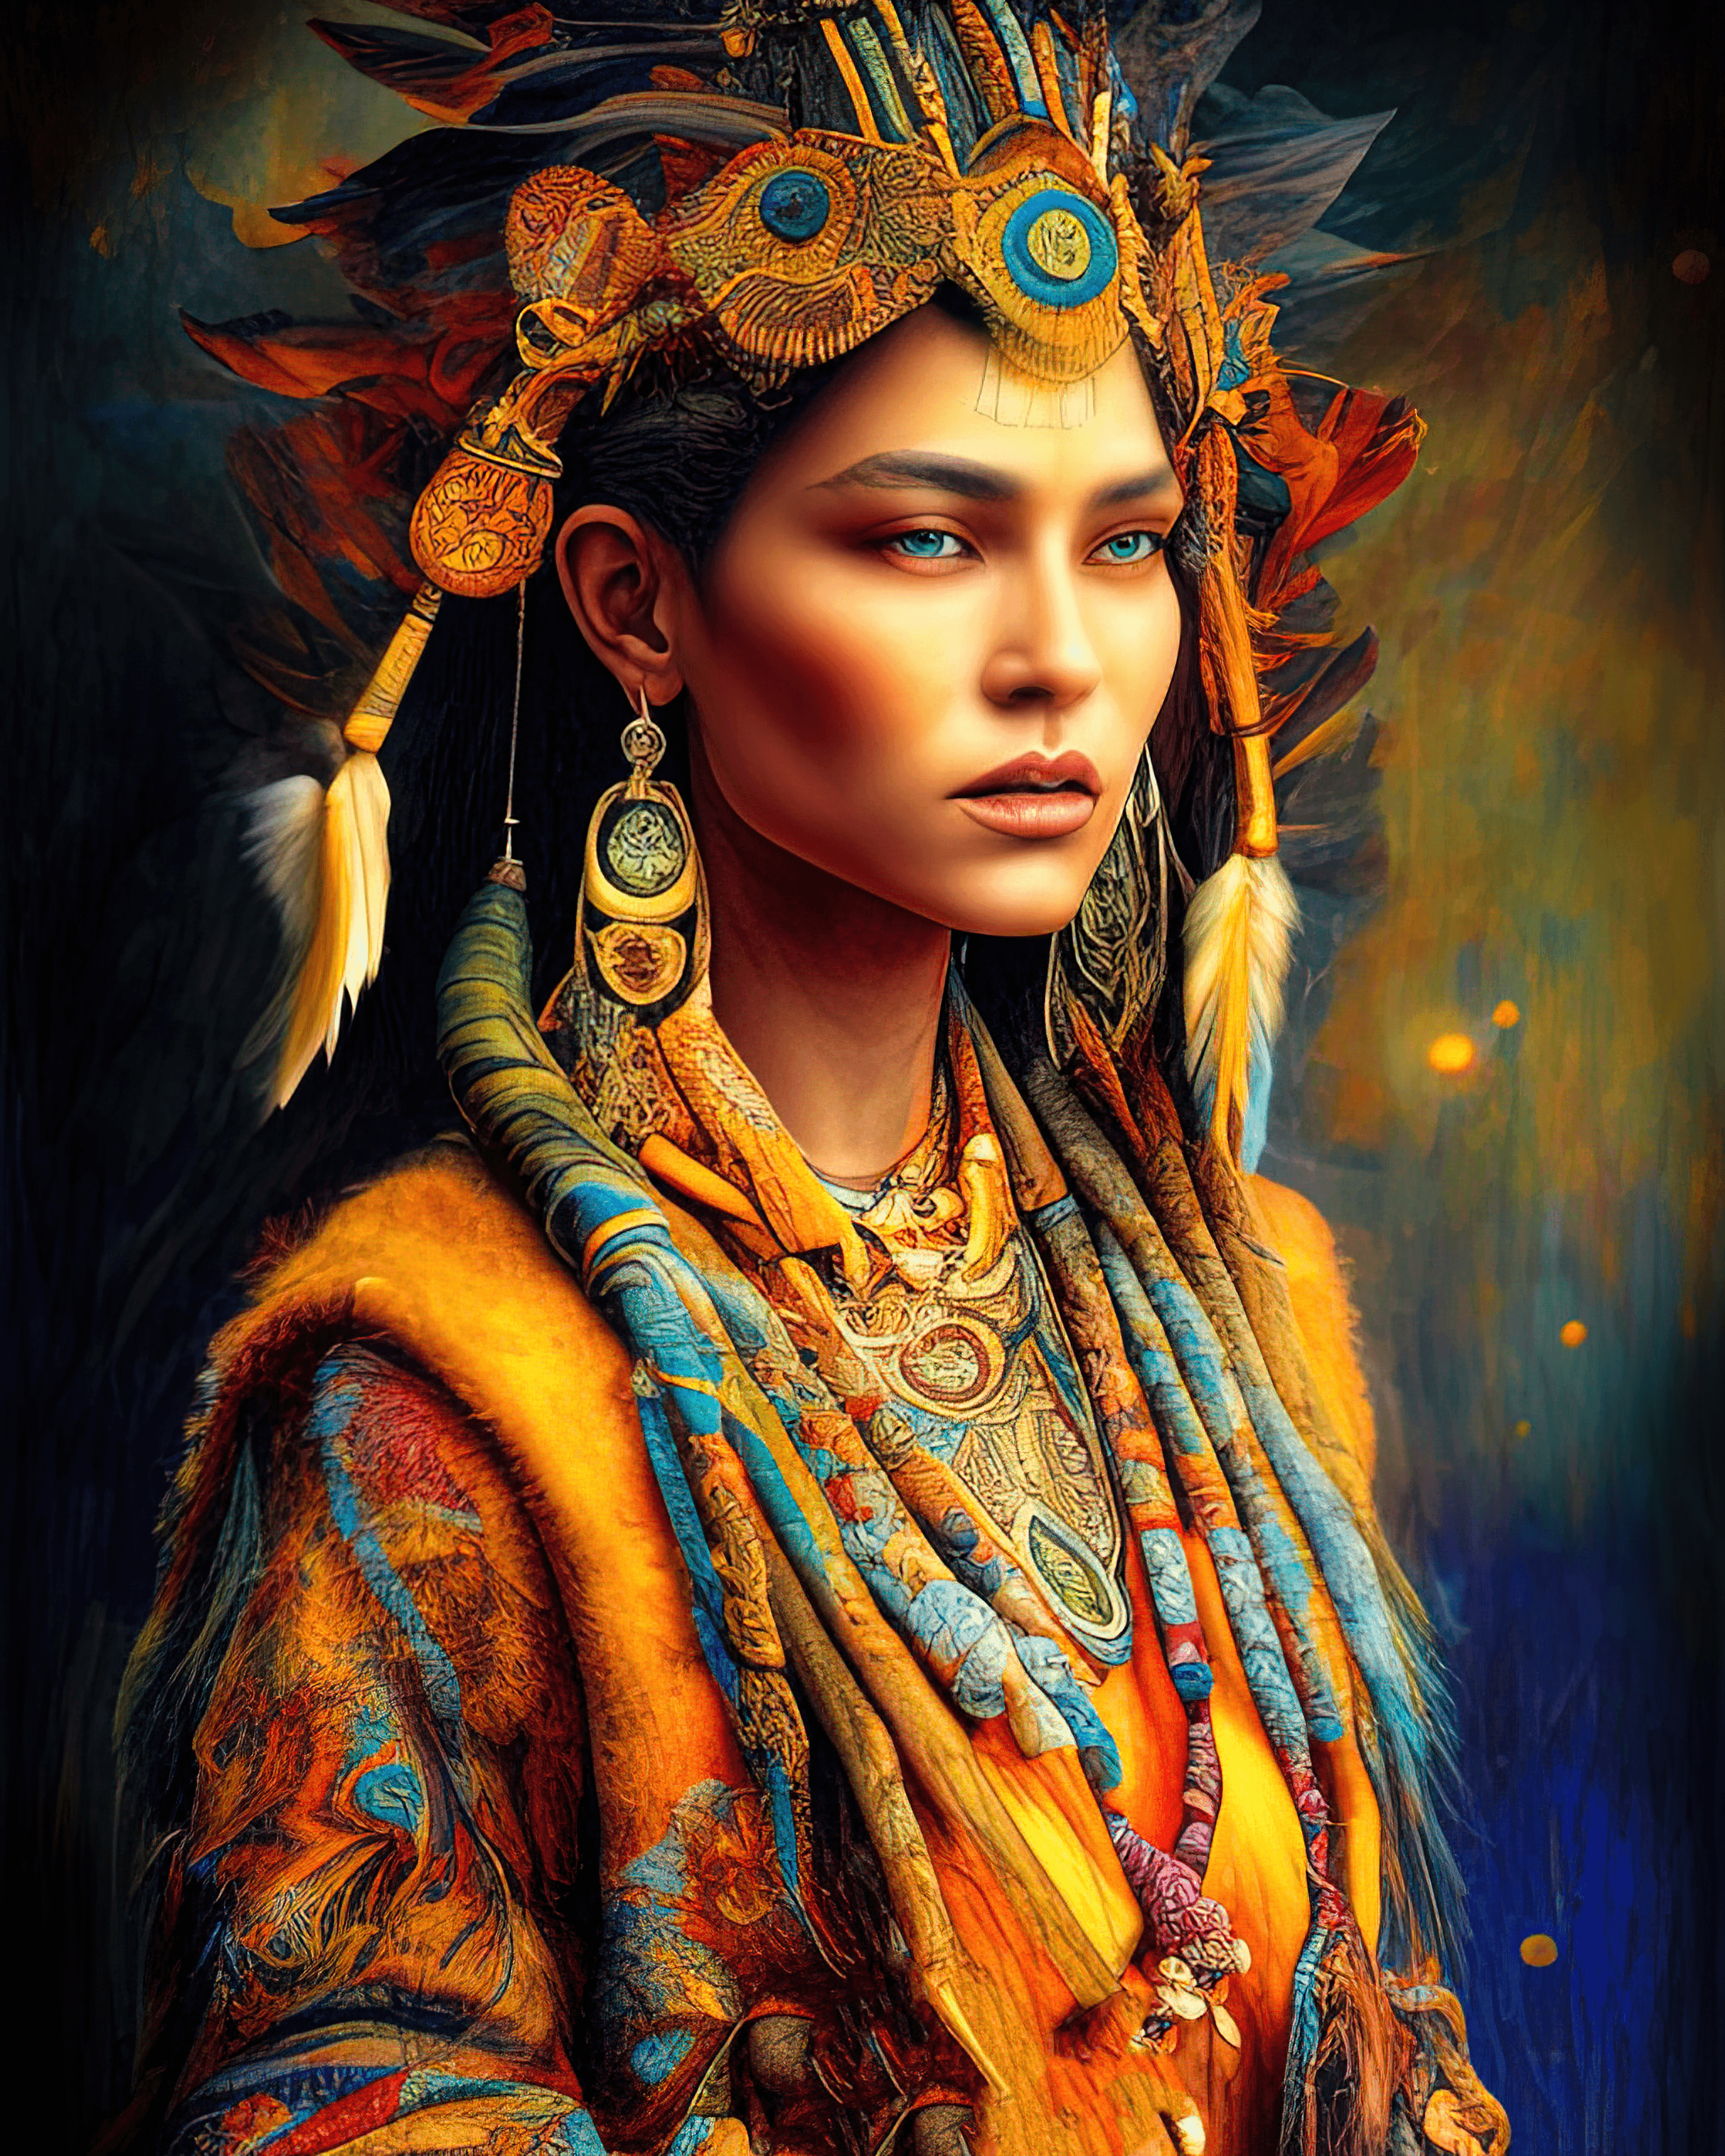 Young Shaman Woman - Altered Perception 04